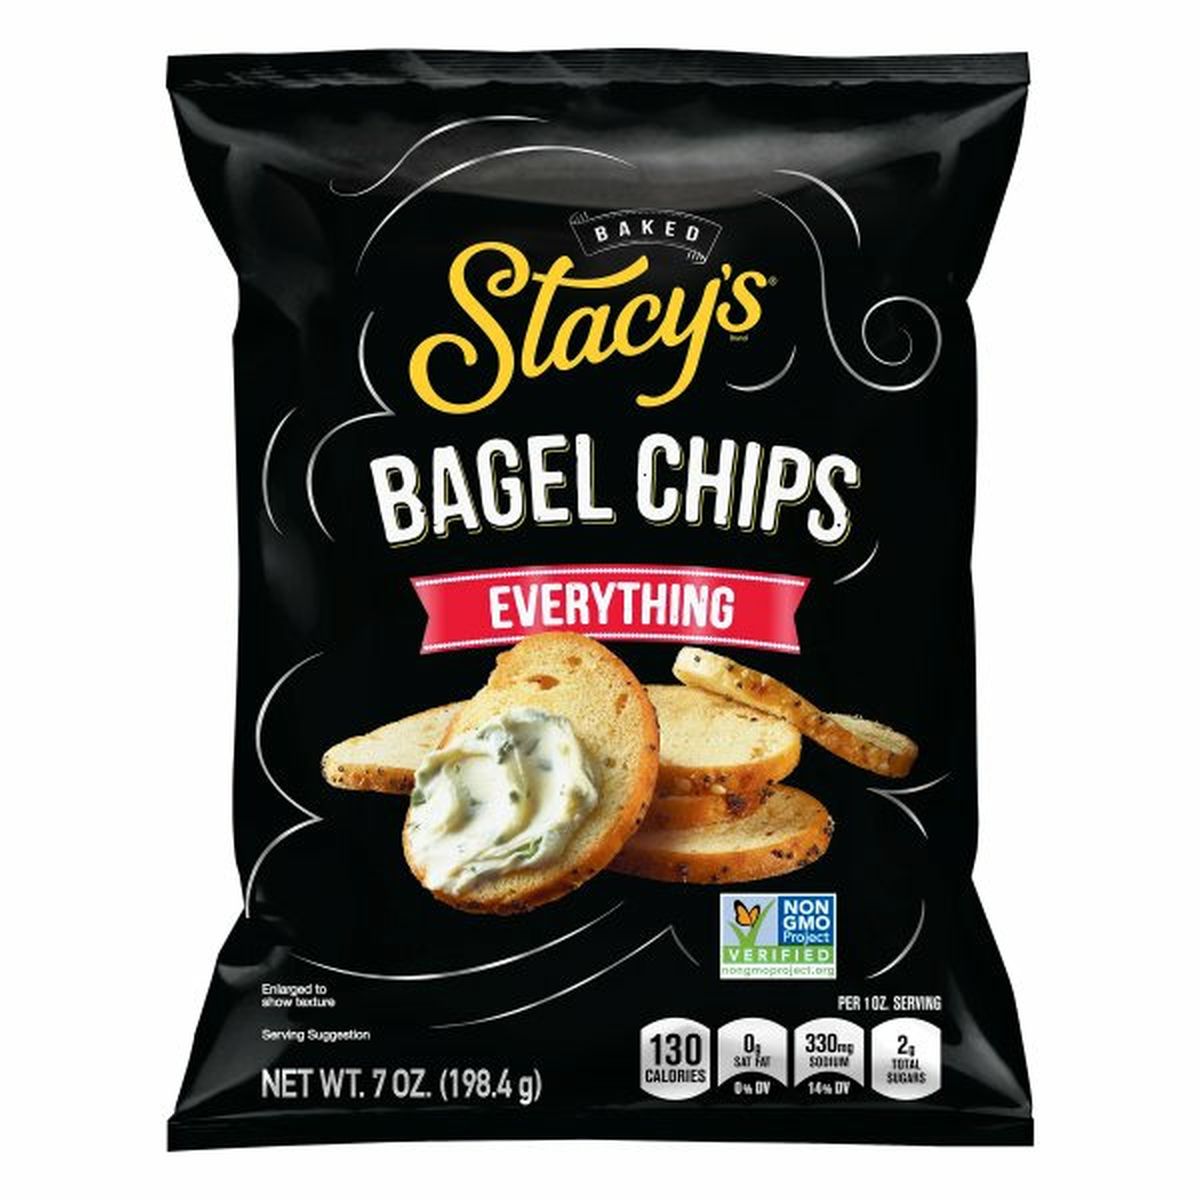 Calories in Stacy's Bagel Chips, Everything, Baked